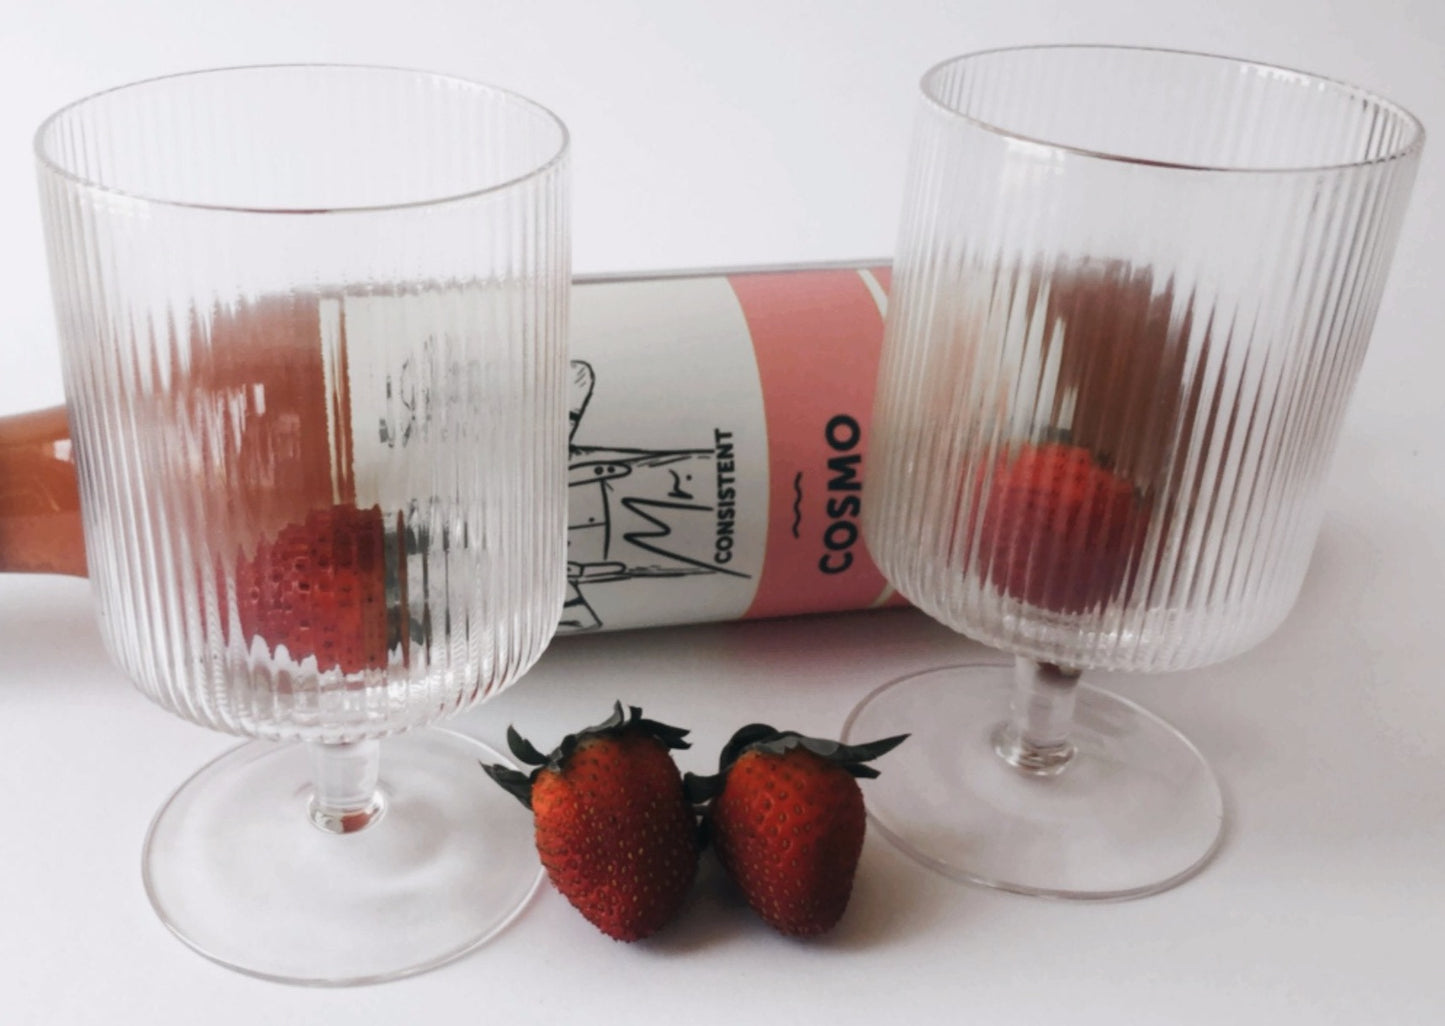 Ribbed Wine Glass is a clear glass comes in a 2 pack